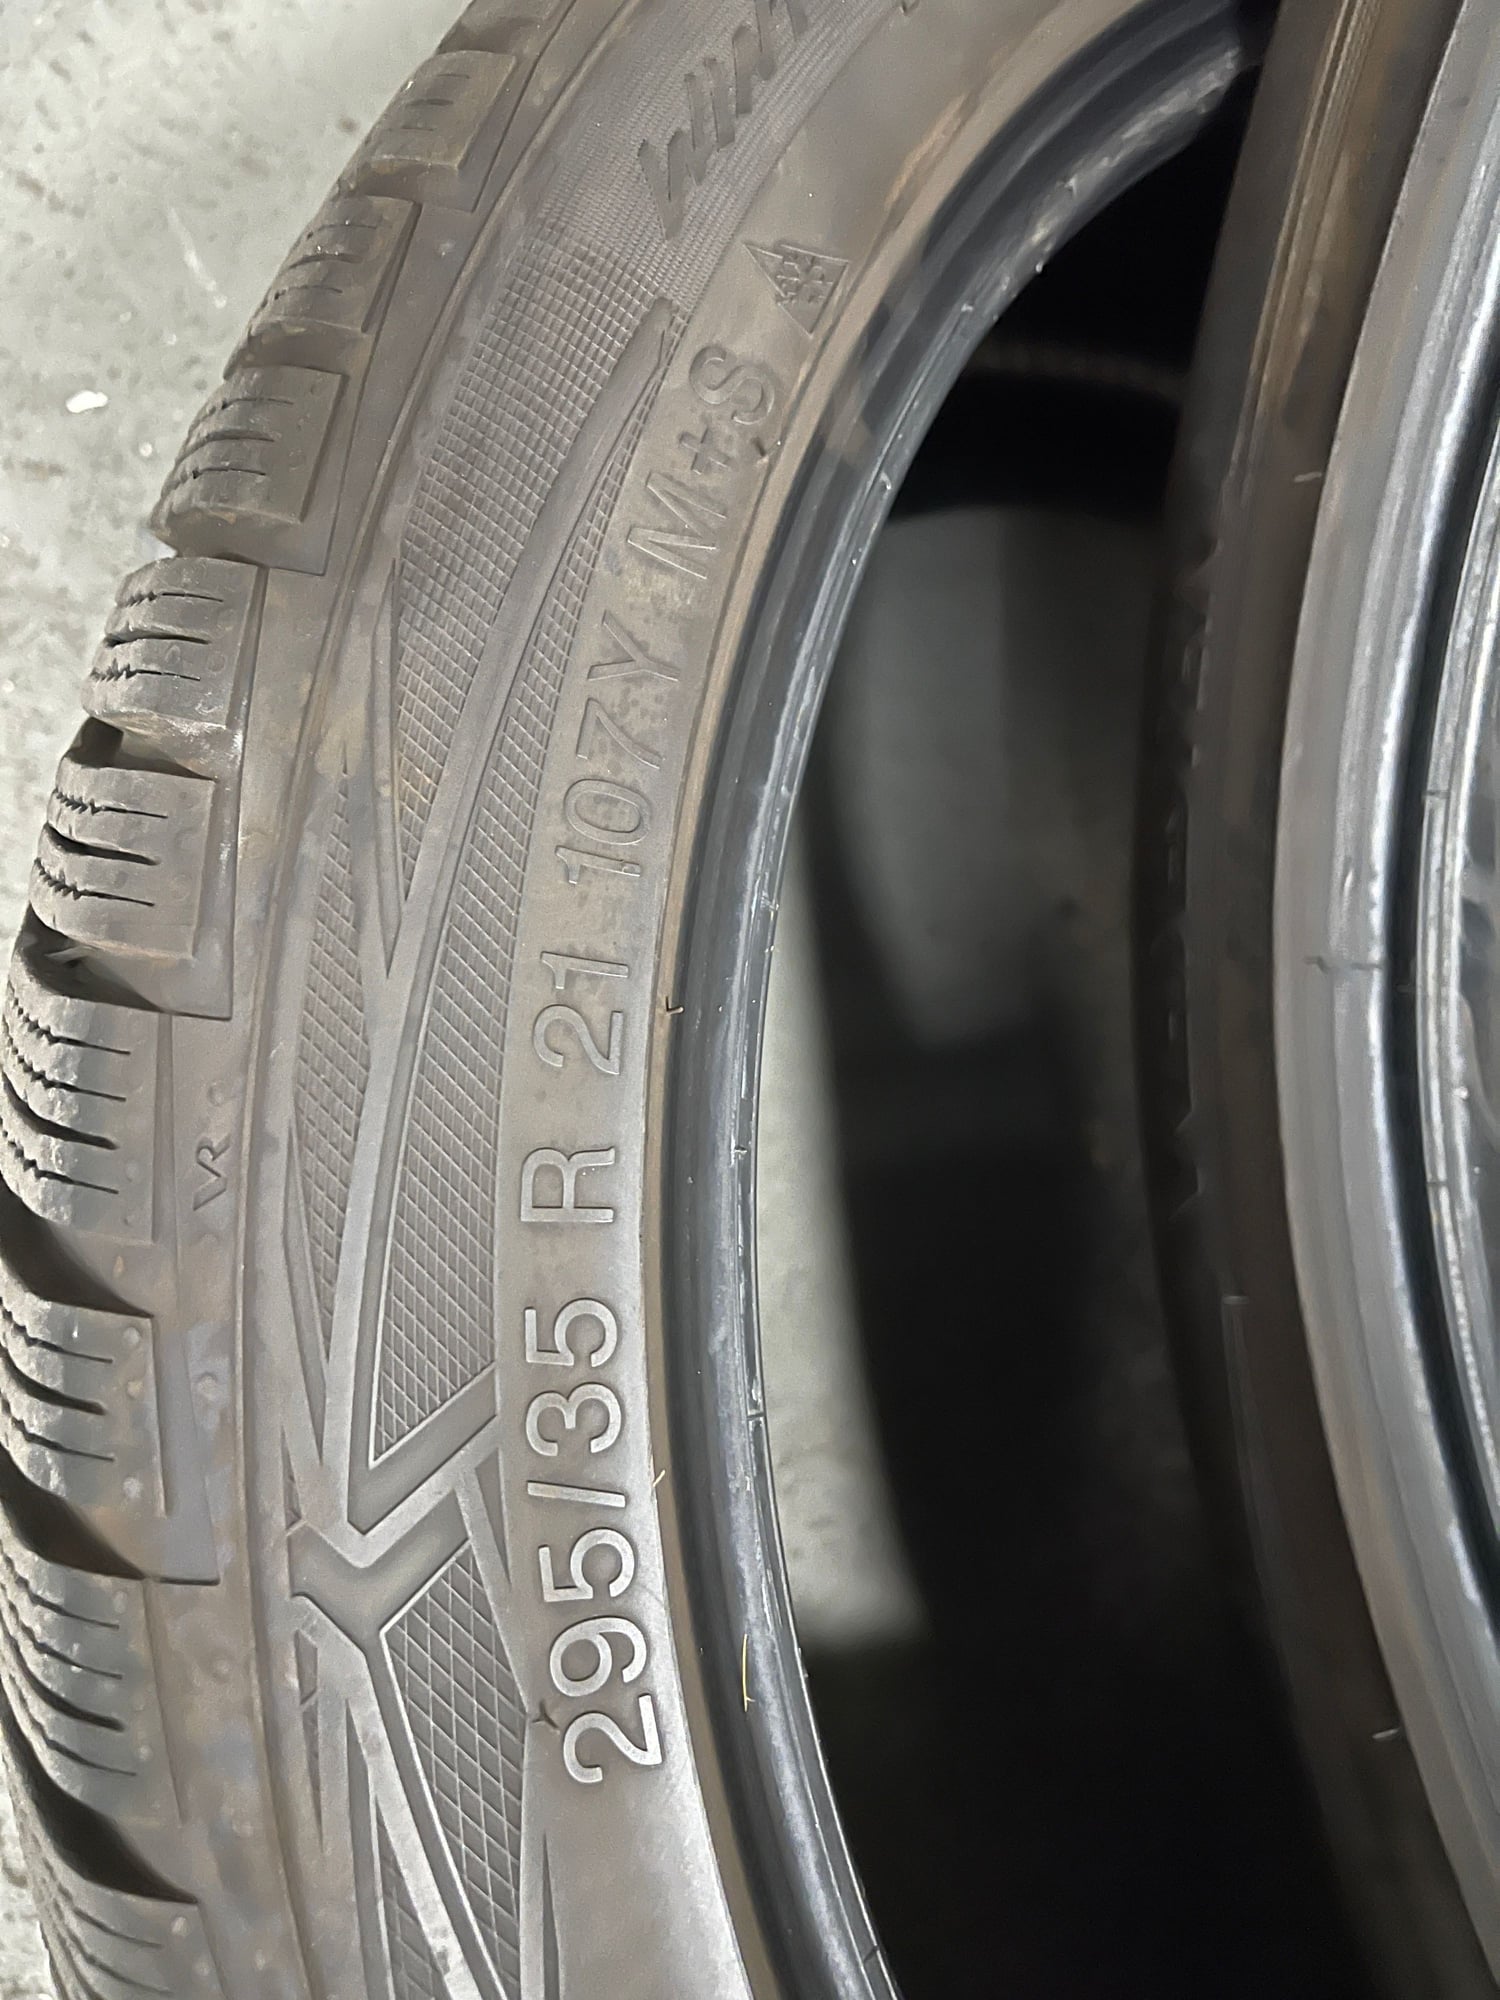 Wheels and Tires/Axles - 21" Wintrac pro winter tires (GLC63S) $975 - Used - 2019 to 2021 Mercedes-Benz GLC63 AMG S - Edgewater, NJ 07020, United States